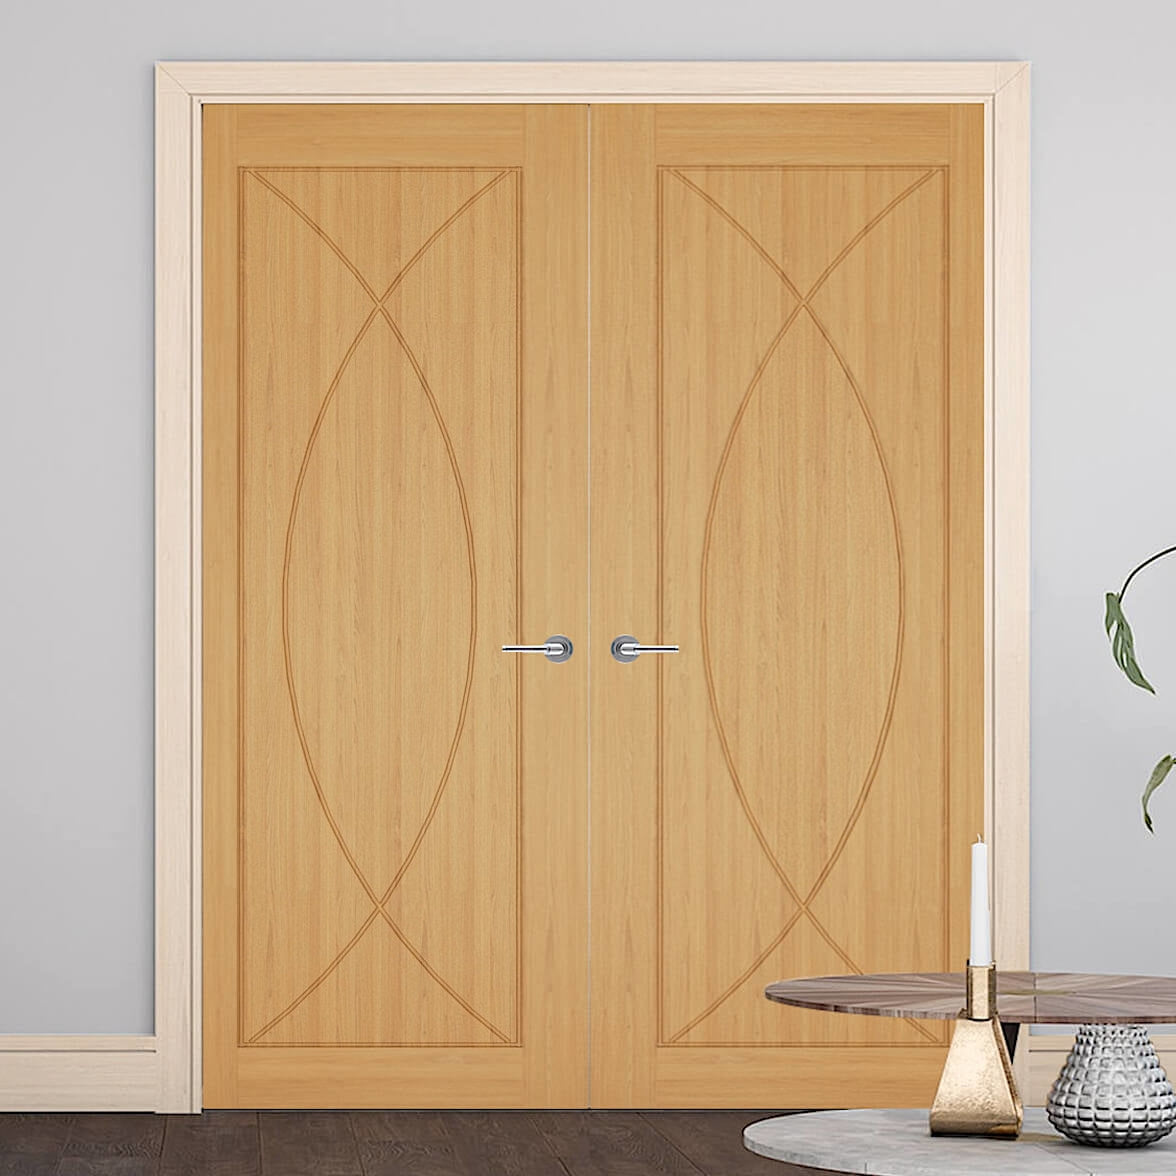 Amalfi Oak Door Pair - Solid panel Amalfi door with symmetry cut curves, the pair has an offset architrave and skirting, the walls are a shade of blue and we have a coffee table to the bottom left of the image.